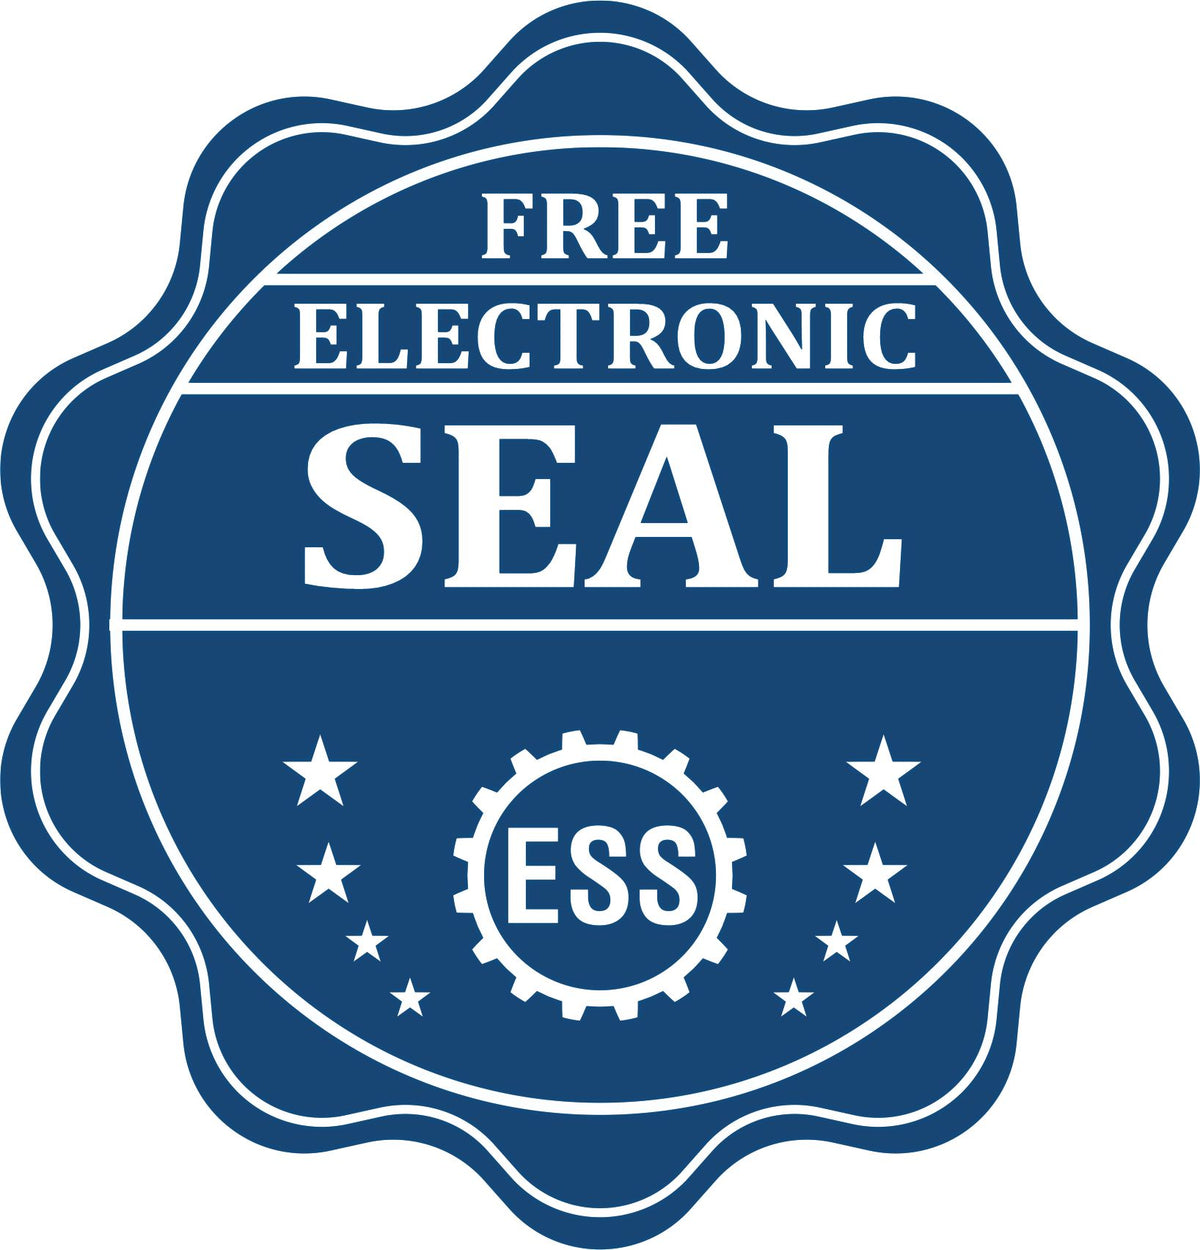 A badge showing a free electronic seal for the Hybrid Maine Landscape Architect Seal with stars and the ESS gear on the emblem.